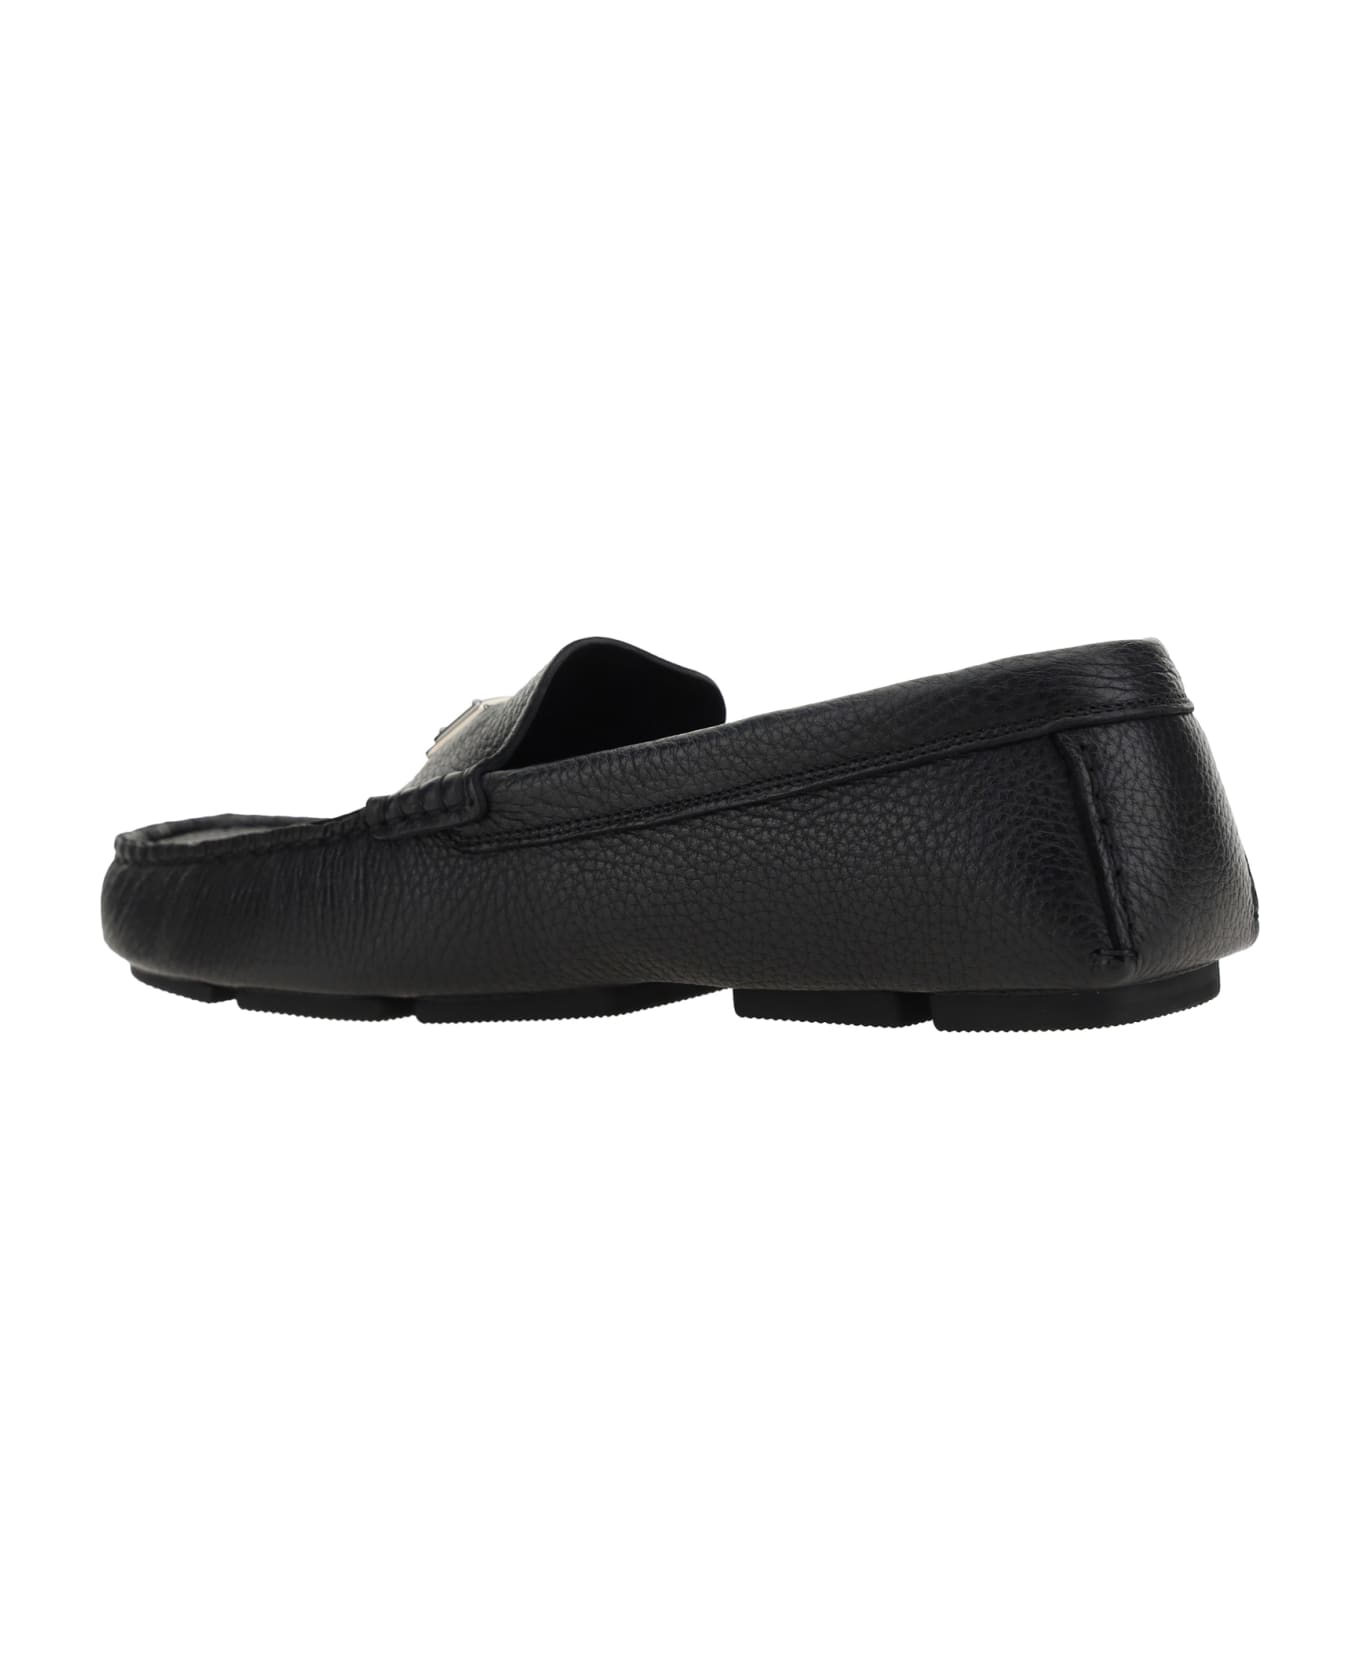 Dolce & Gabbana Leather Loafers - black